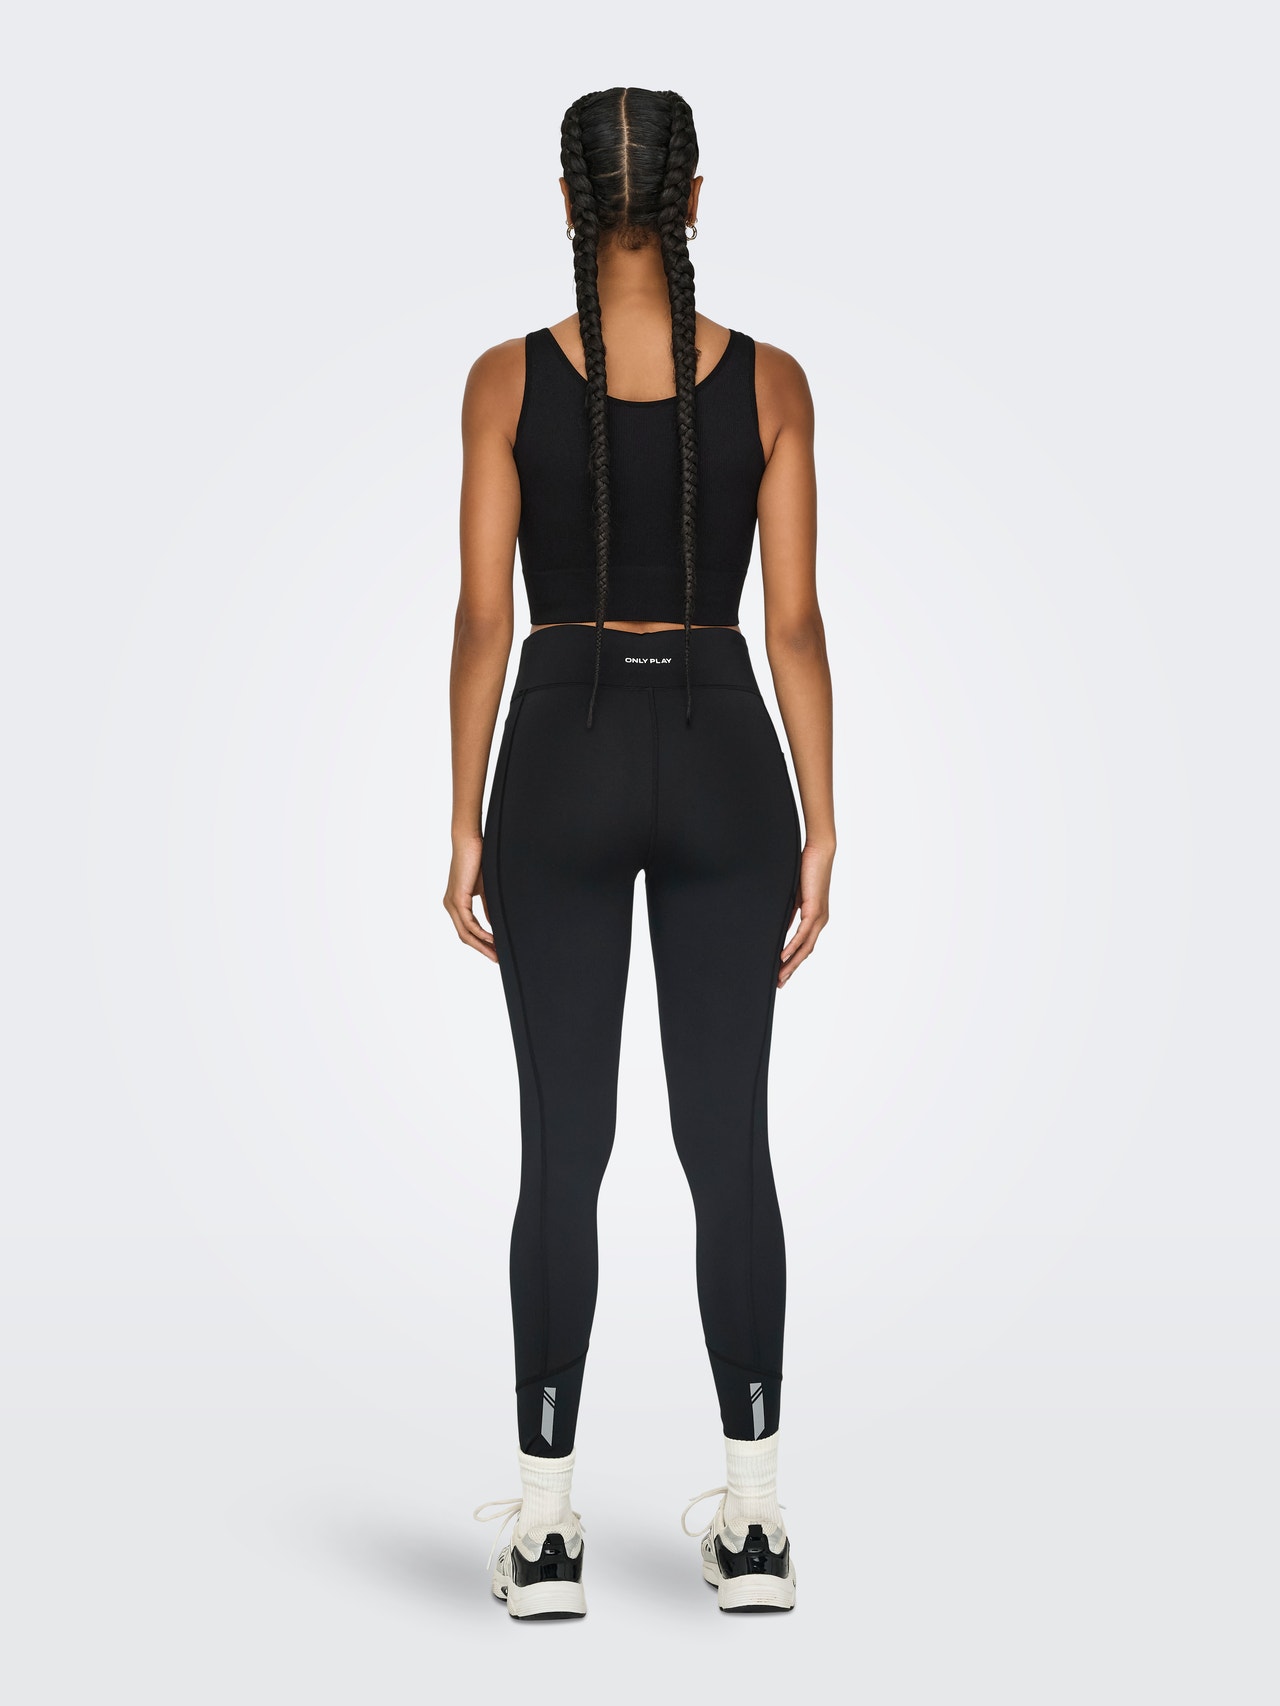 ONLY Tight fit High waist Legging -Black - 15274629